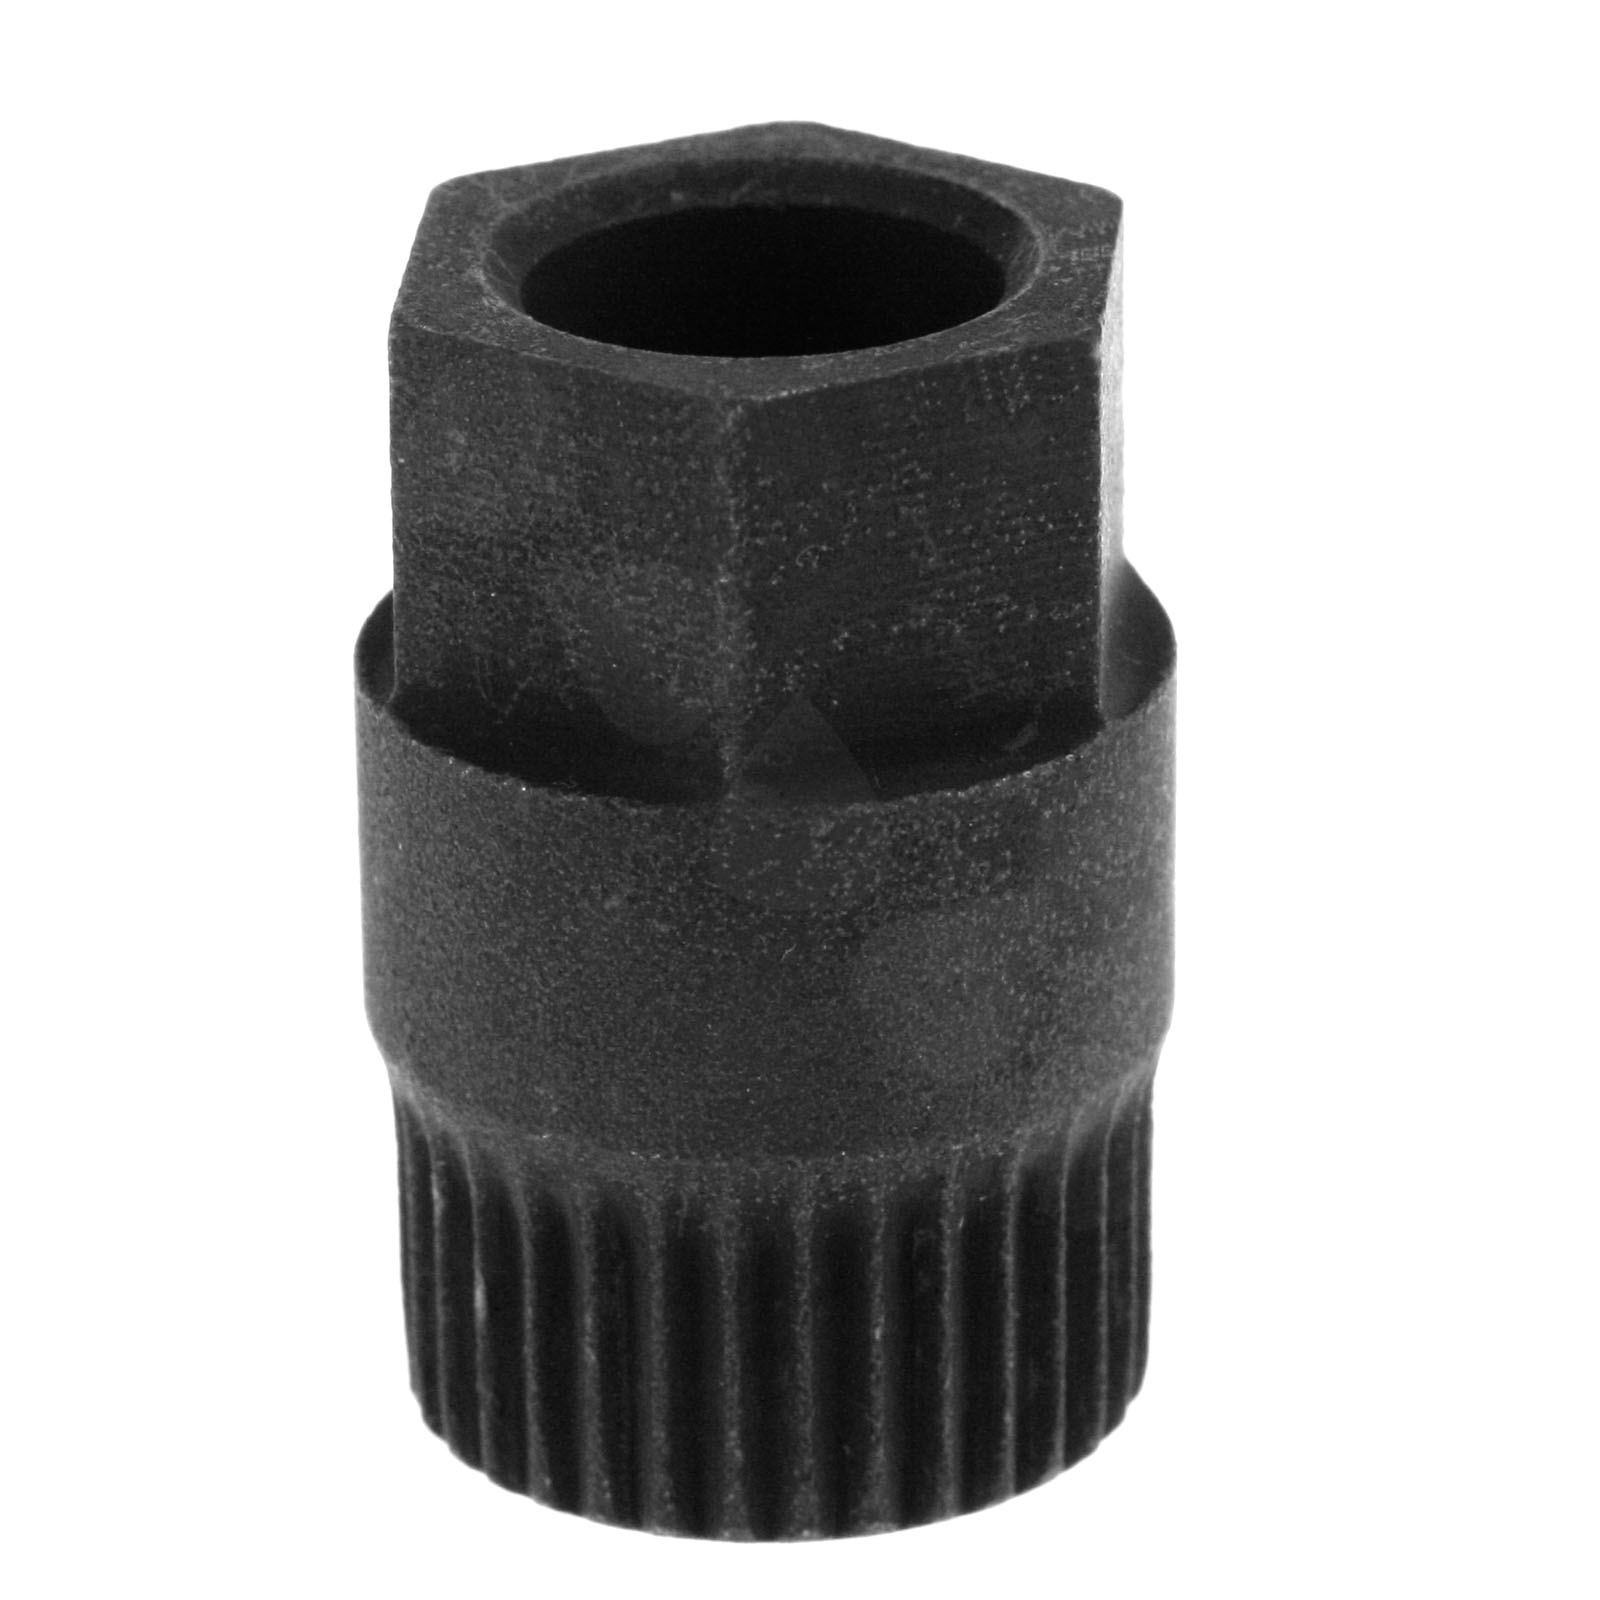 Ford alternator pulley removal tool